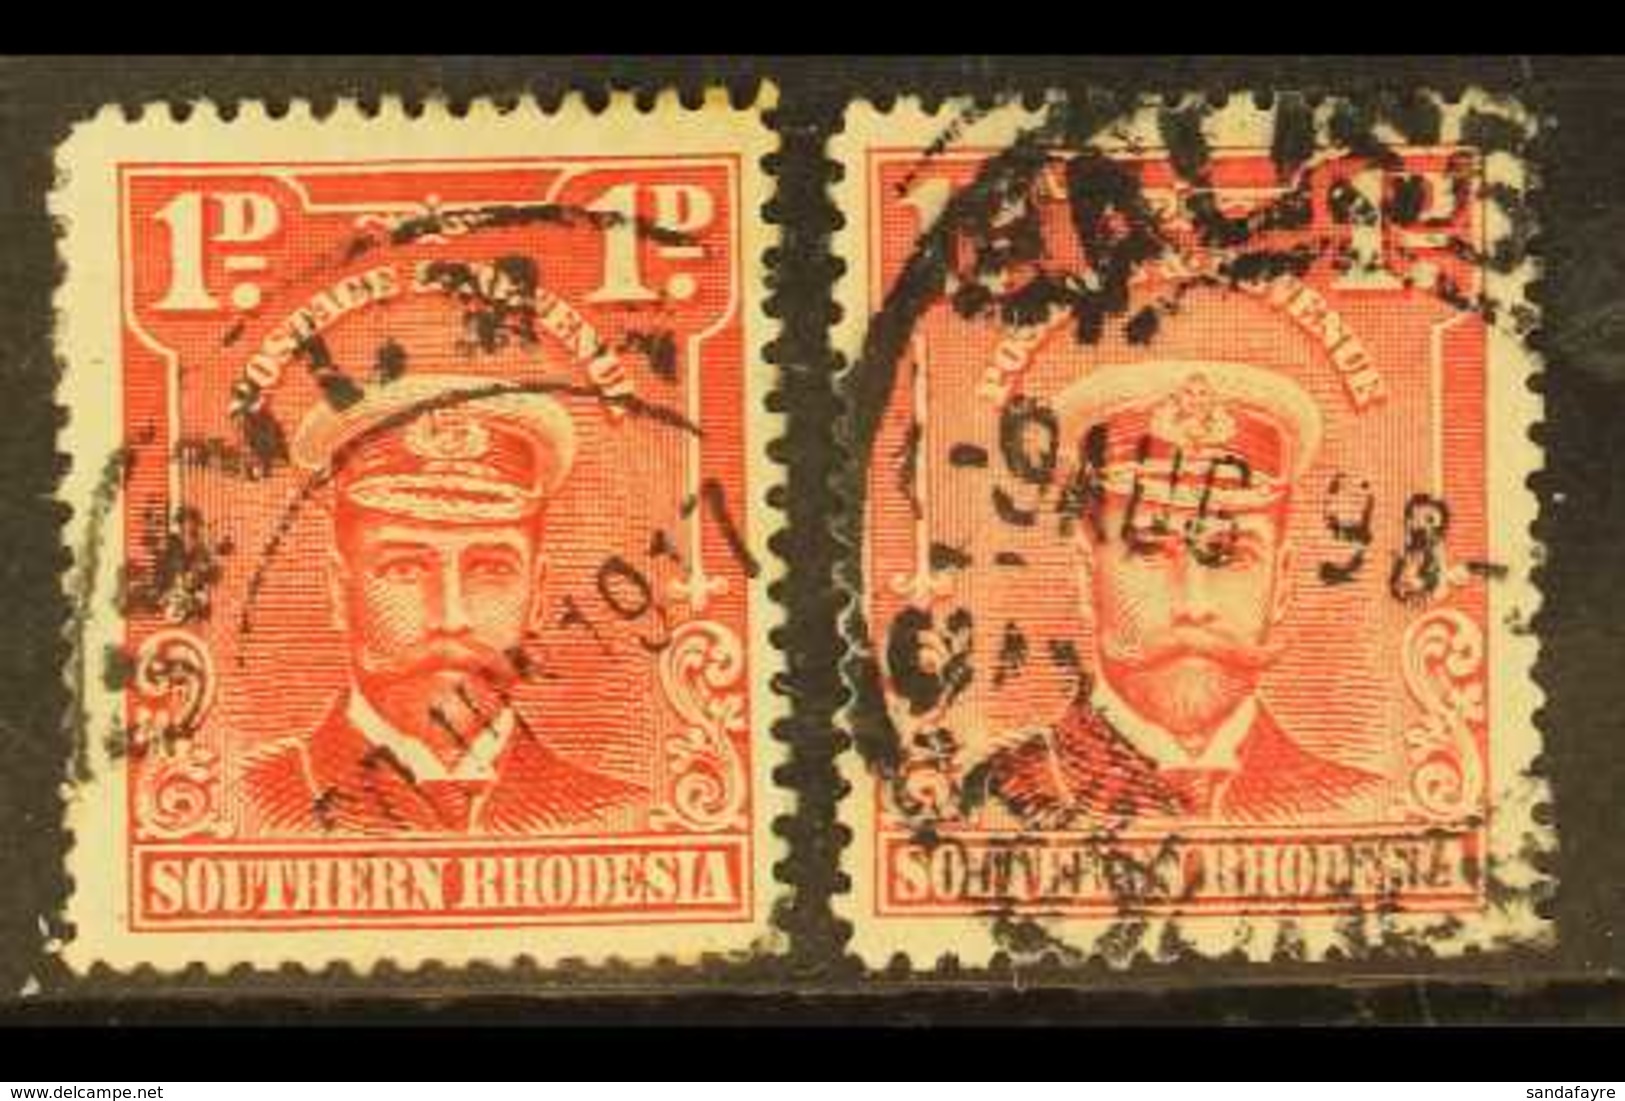 1924 CANCELLATION ERRORS Two 1d Bright Rose Stamps, SG 2, One With "1917" Year Date, The Other With "-9 AUG 98" Date (2) - Rhodésie Du Sud (...-1964)